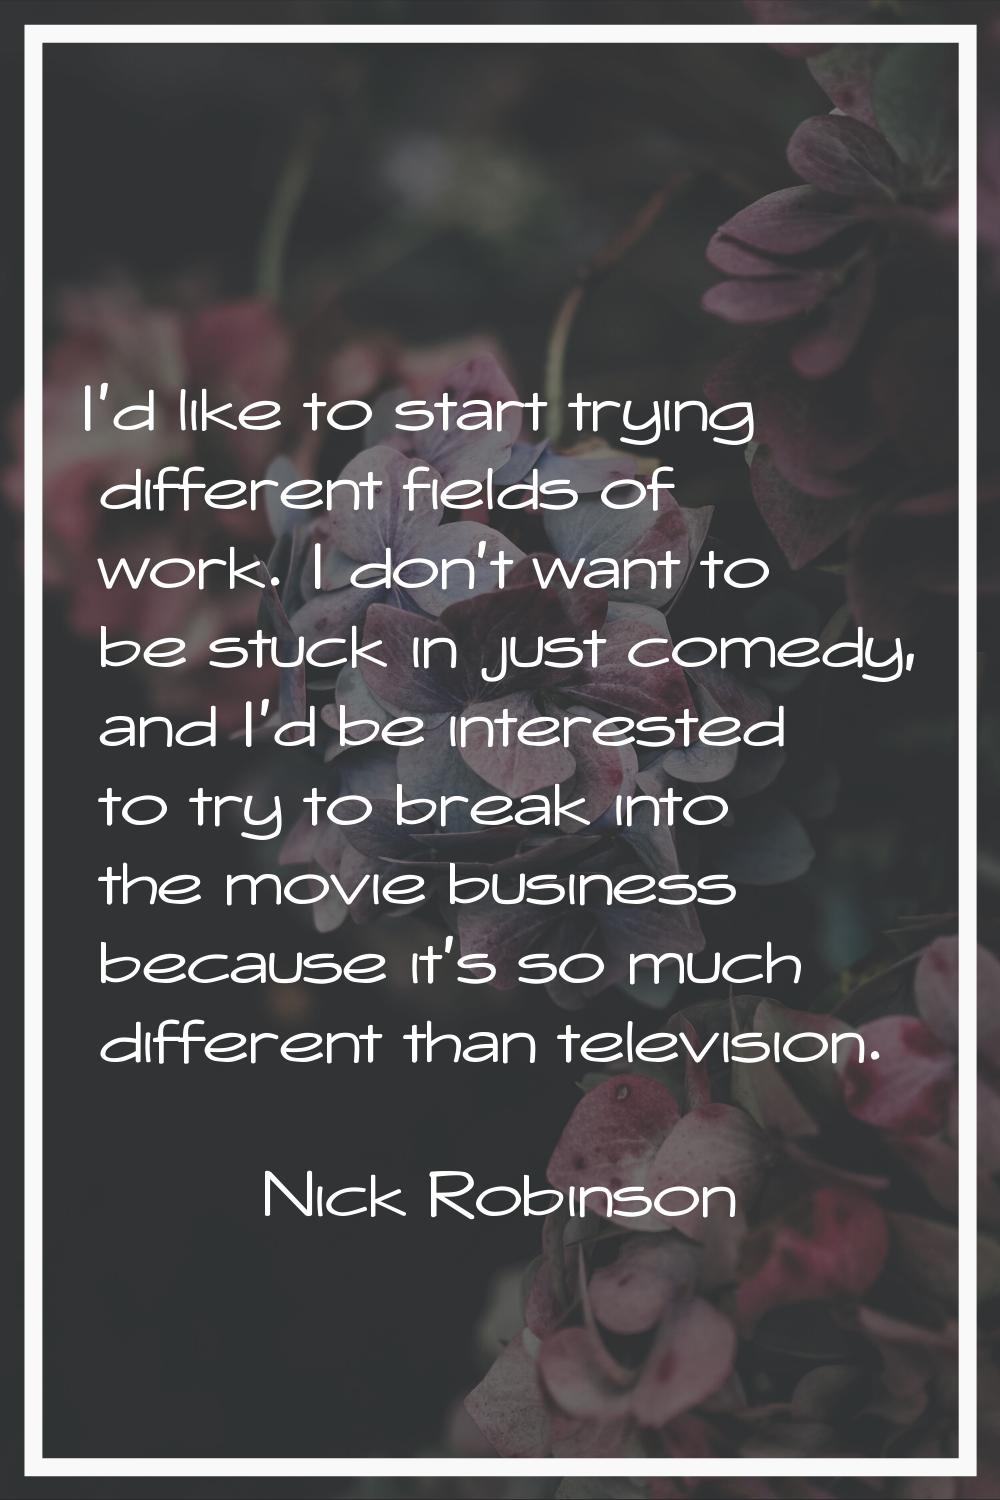 I'd like to start trying different fields of work. I don't want to be stuck in just comedy, and I'd